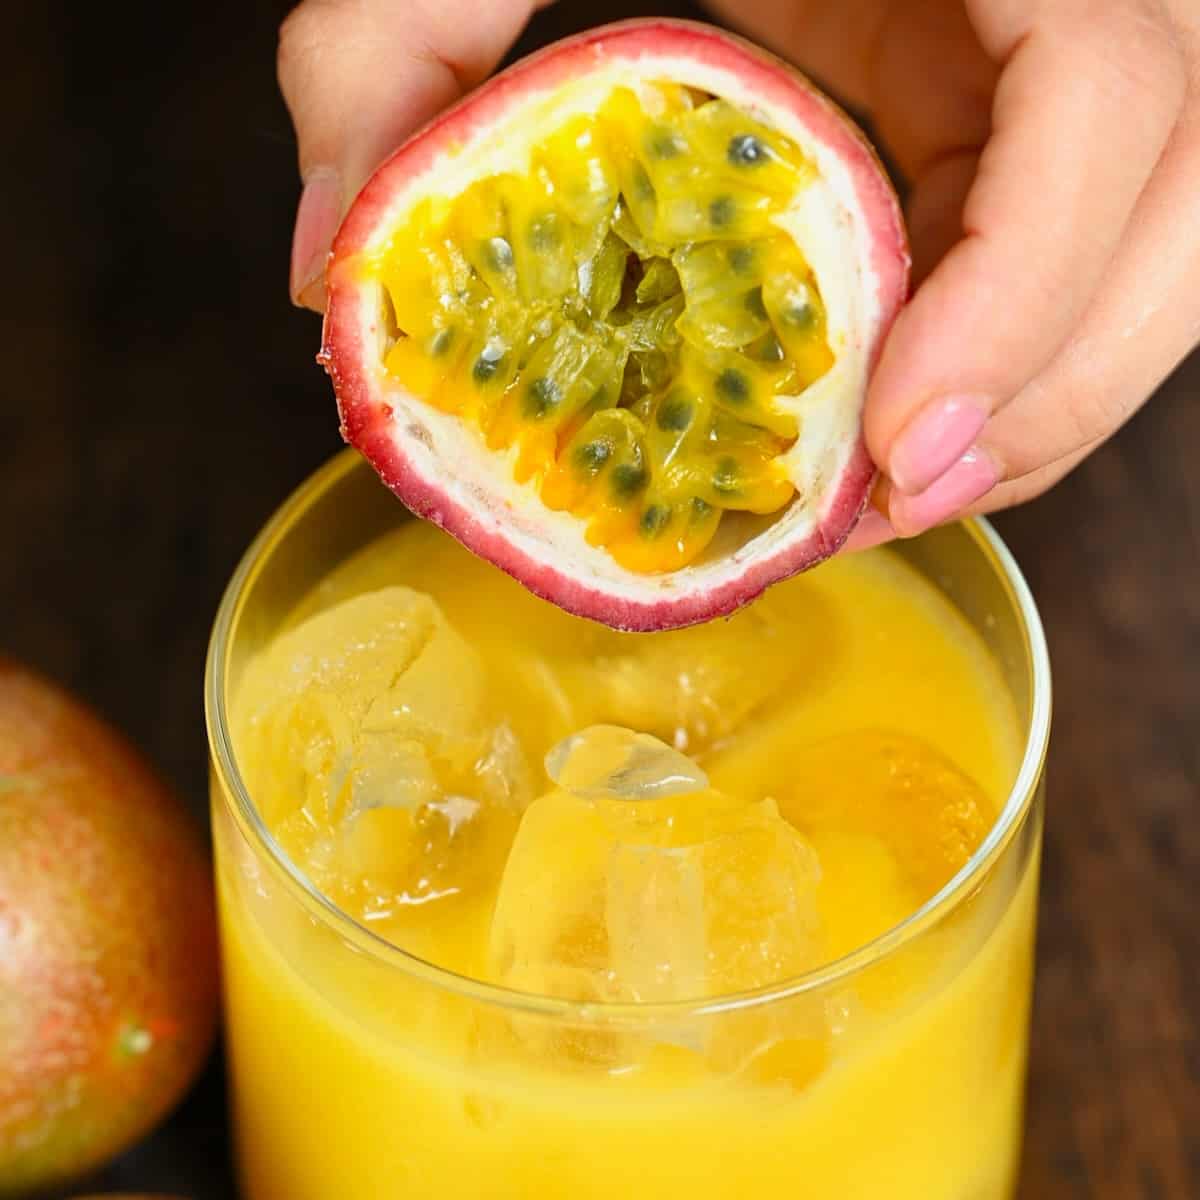 How to Make Passion Fruit Juice (2 Methods) - Alphafoodie